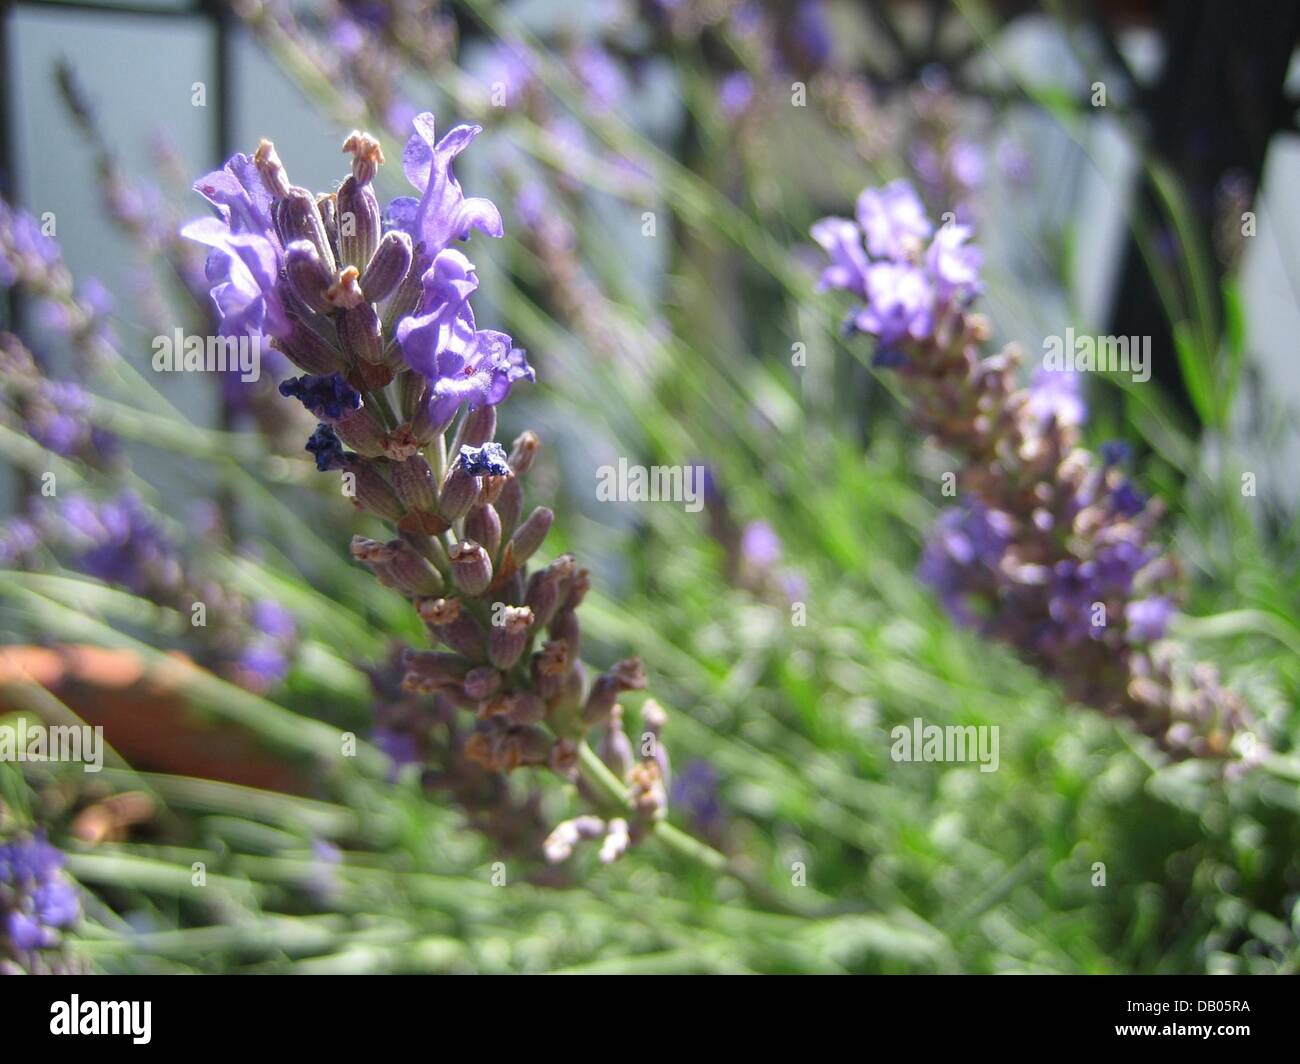 Violet blue blooming Grosso lavender pictured in Frankfurt Main, Germany, 28 June 2007. The lavender variety named after lavender farmer Pierre Grosso covers about 80 per cent of the cultivation in France's Provence region. Compared to other lavender varieties, the Grosso type has the highest concentration of essential oils and the longest panicles. Photo: Beate Schleep Stock Photo